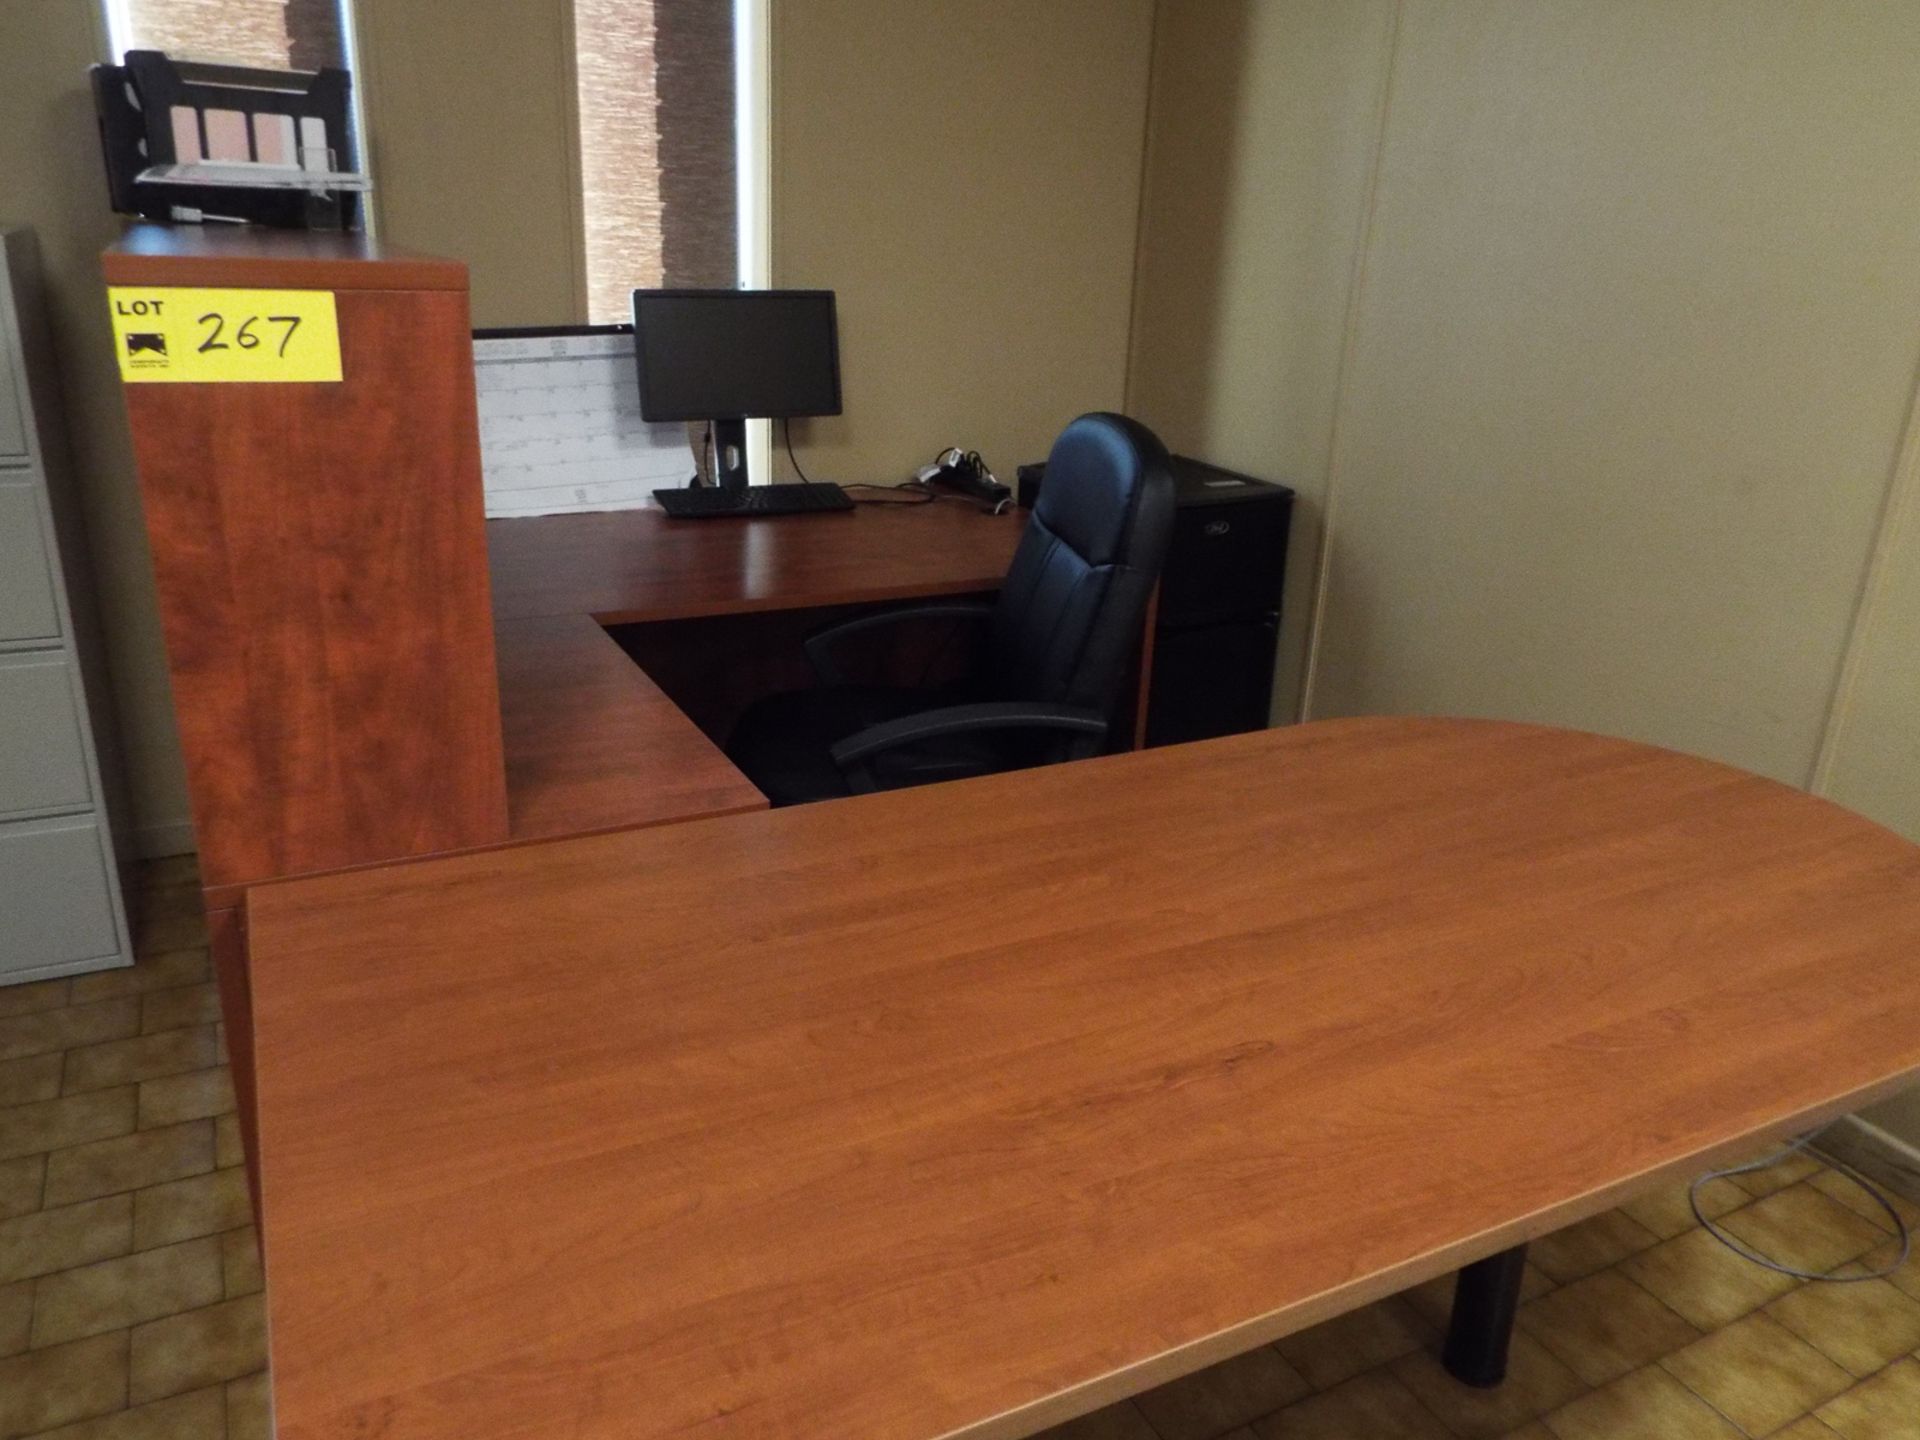 LOT/ REMAINING CONTENTS OF FRONT OFFICE - RECEPTION DESK WITH HUTCH, L-SHAPED DESK, OFFICE CHAIRS,